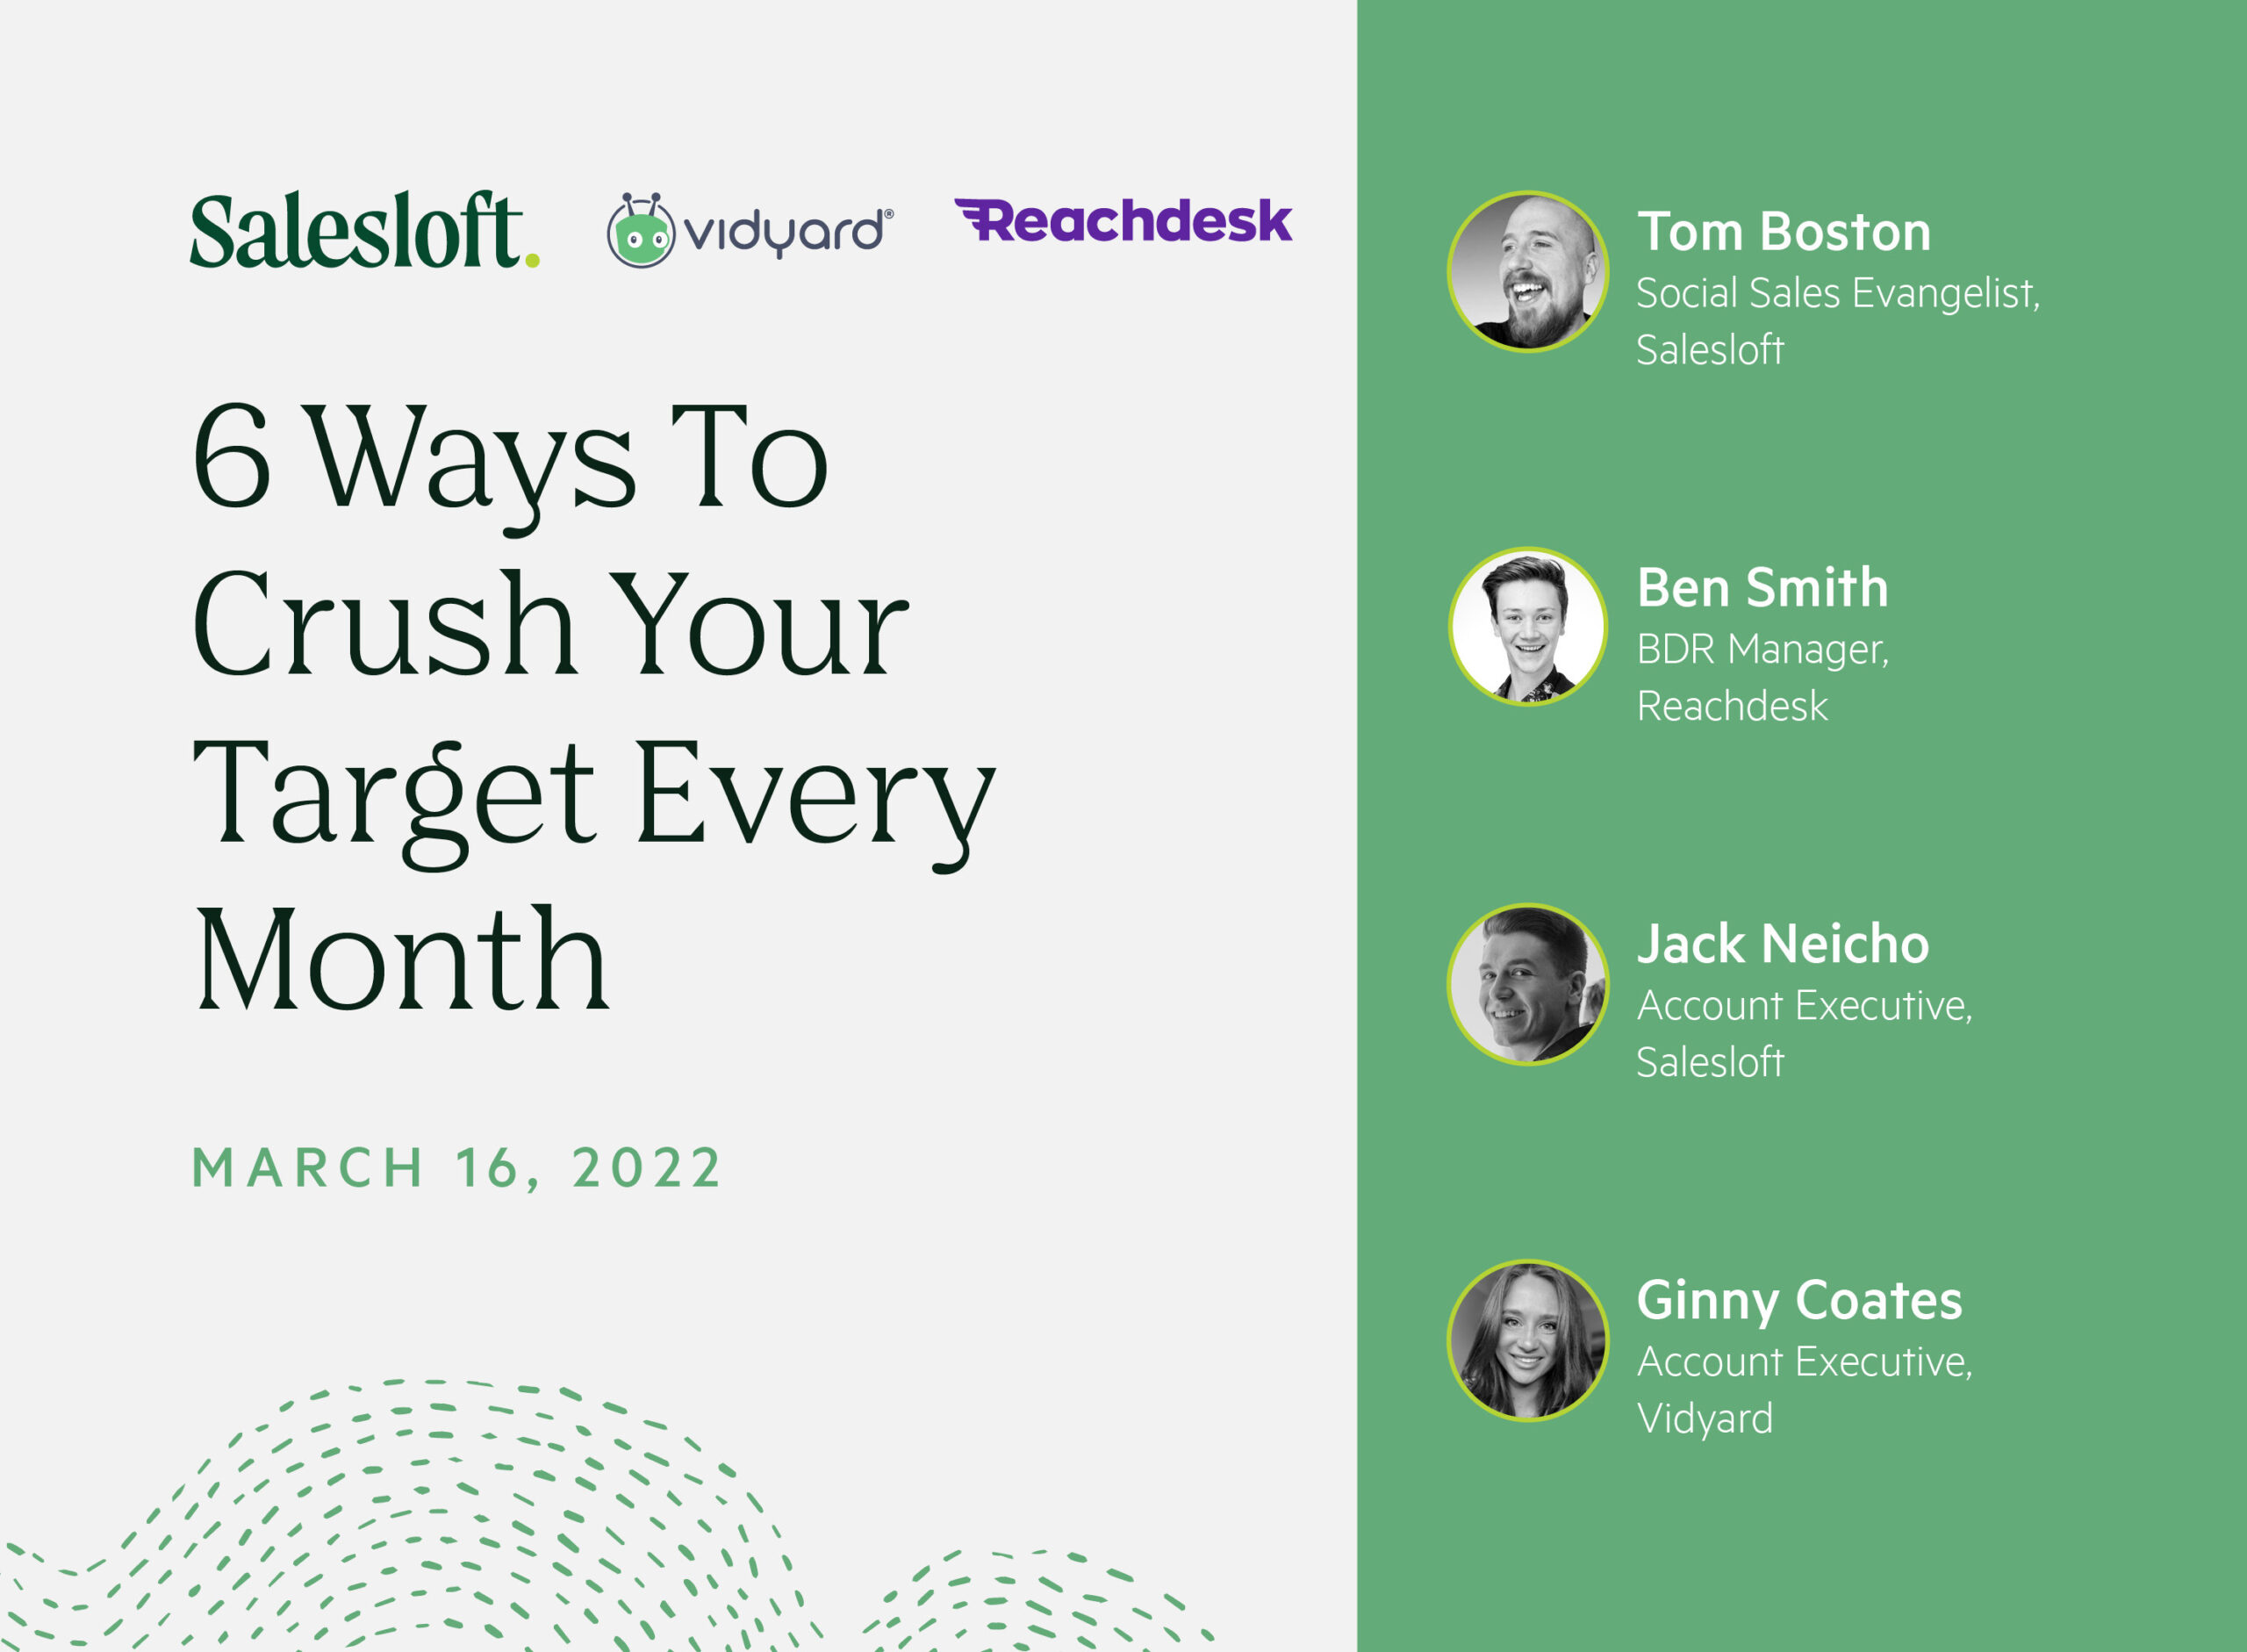 6 Ways To Crush Your Target Every Month